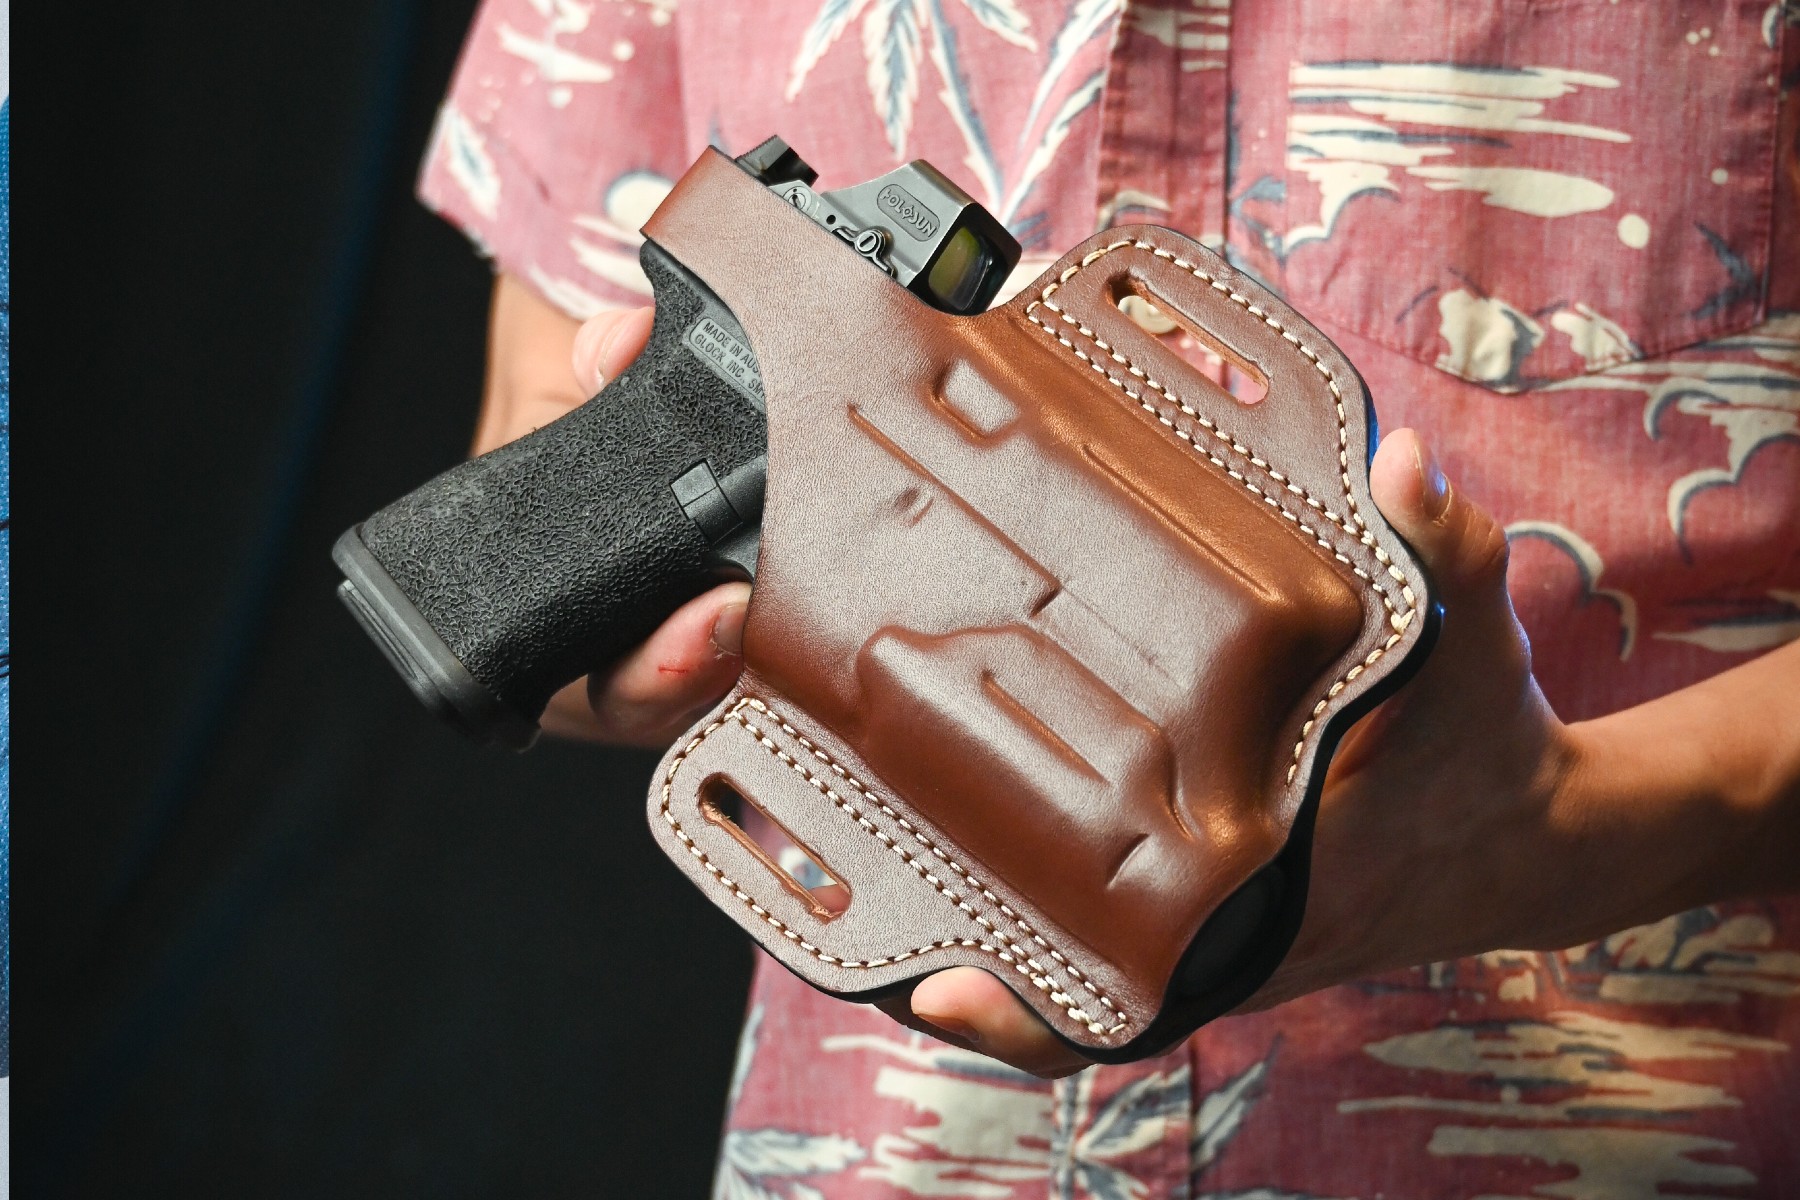 Plastic Holsters for Pistols with Tactical Lights for SIG SAUER P227R3  COMPACT